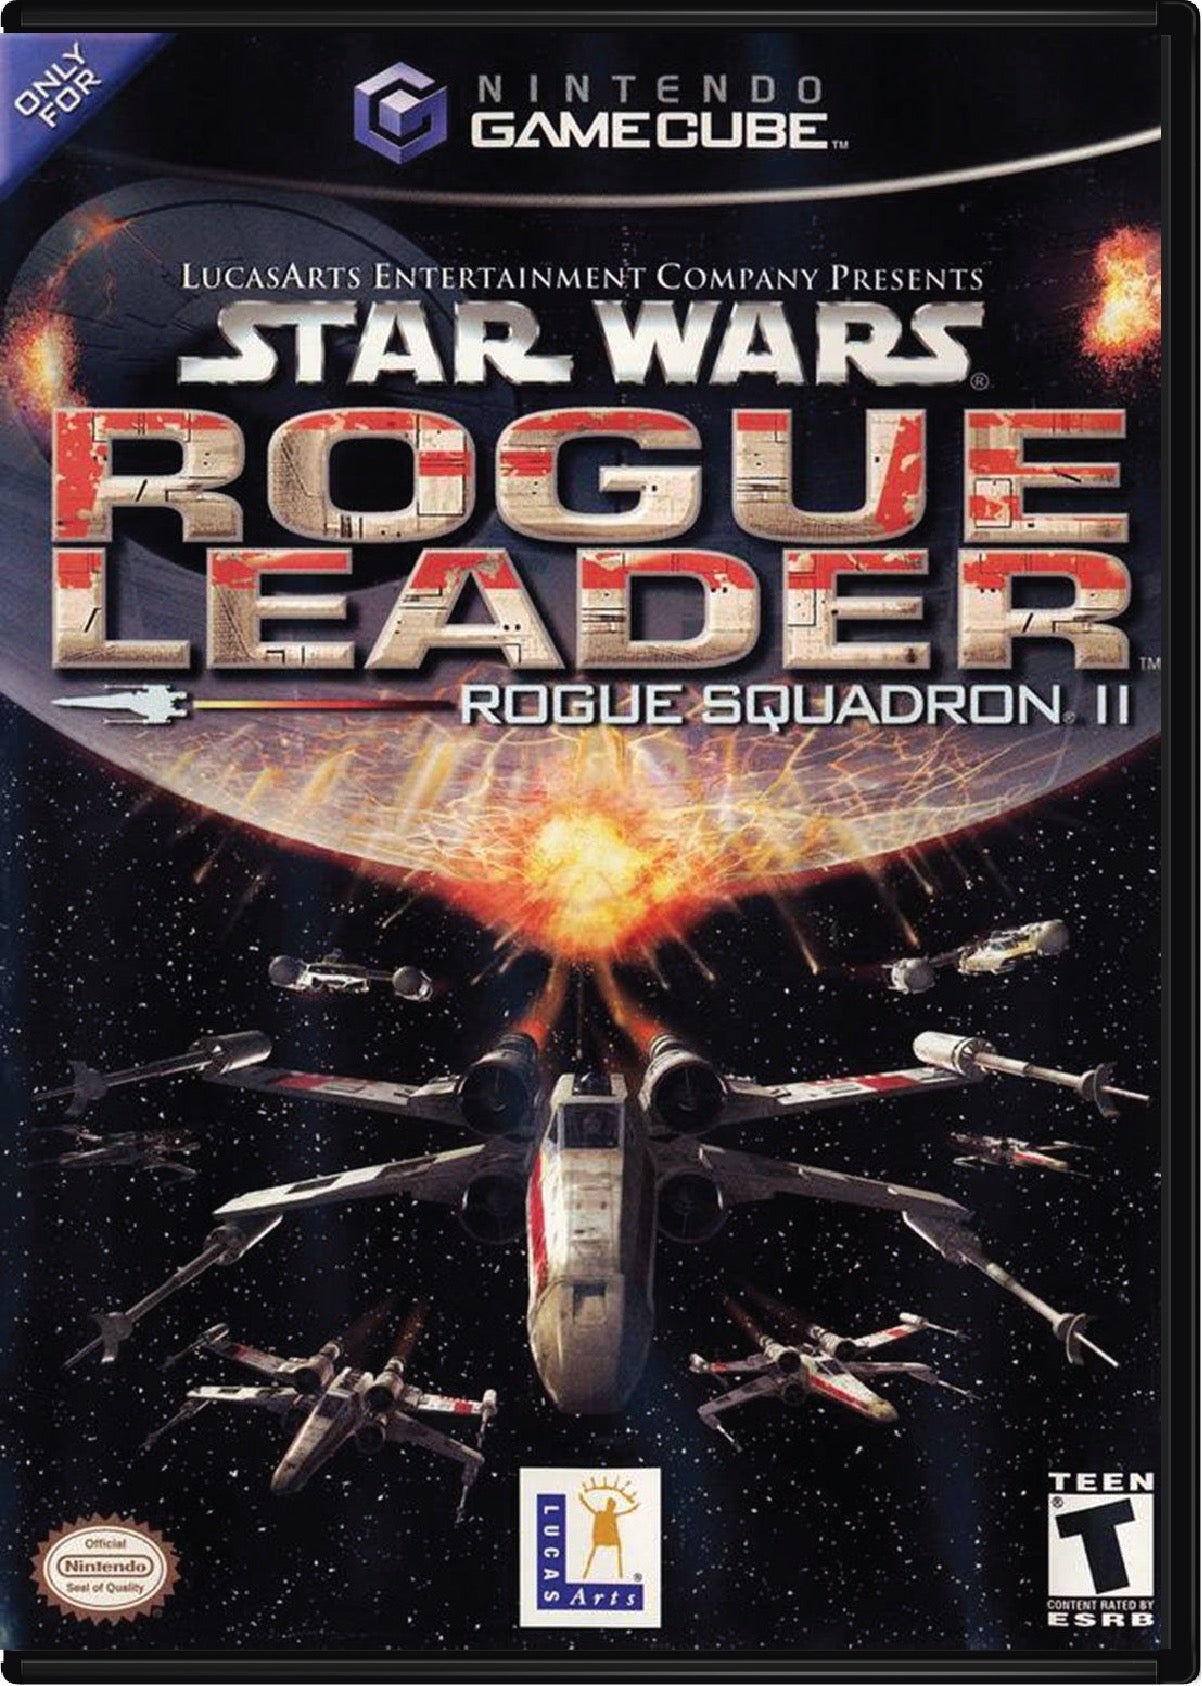 Star Wars Rogue Leader Cover Art and Product Photo